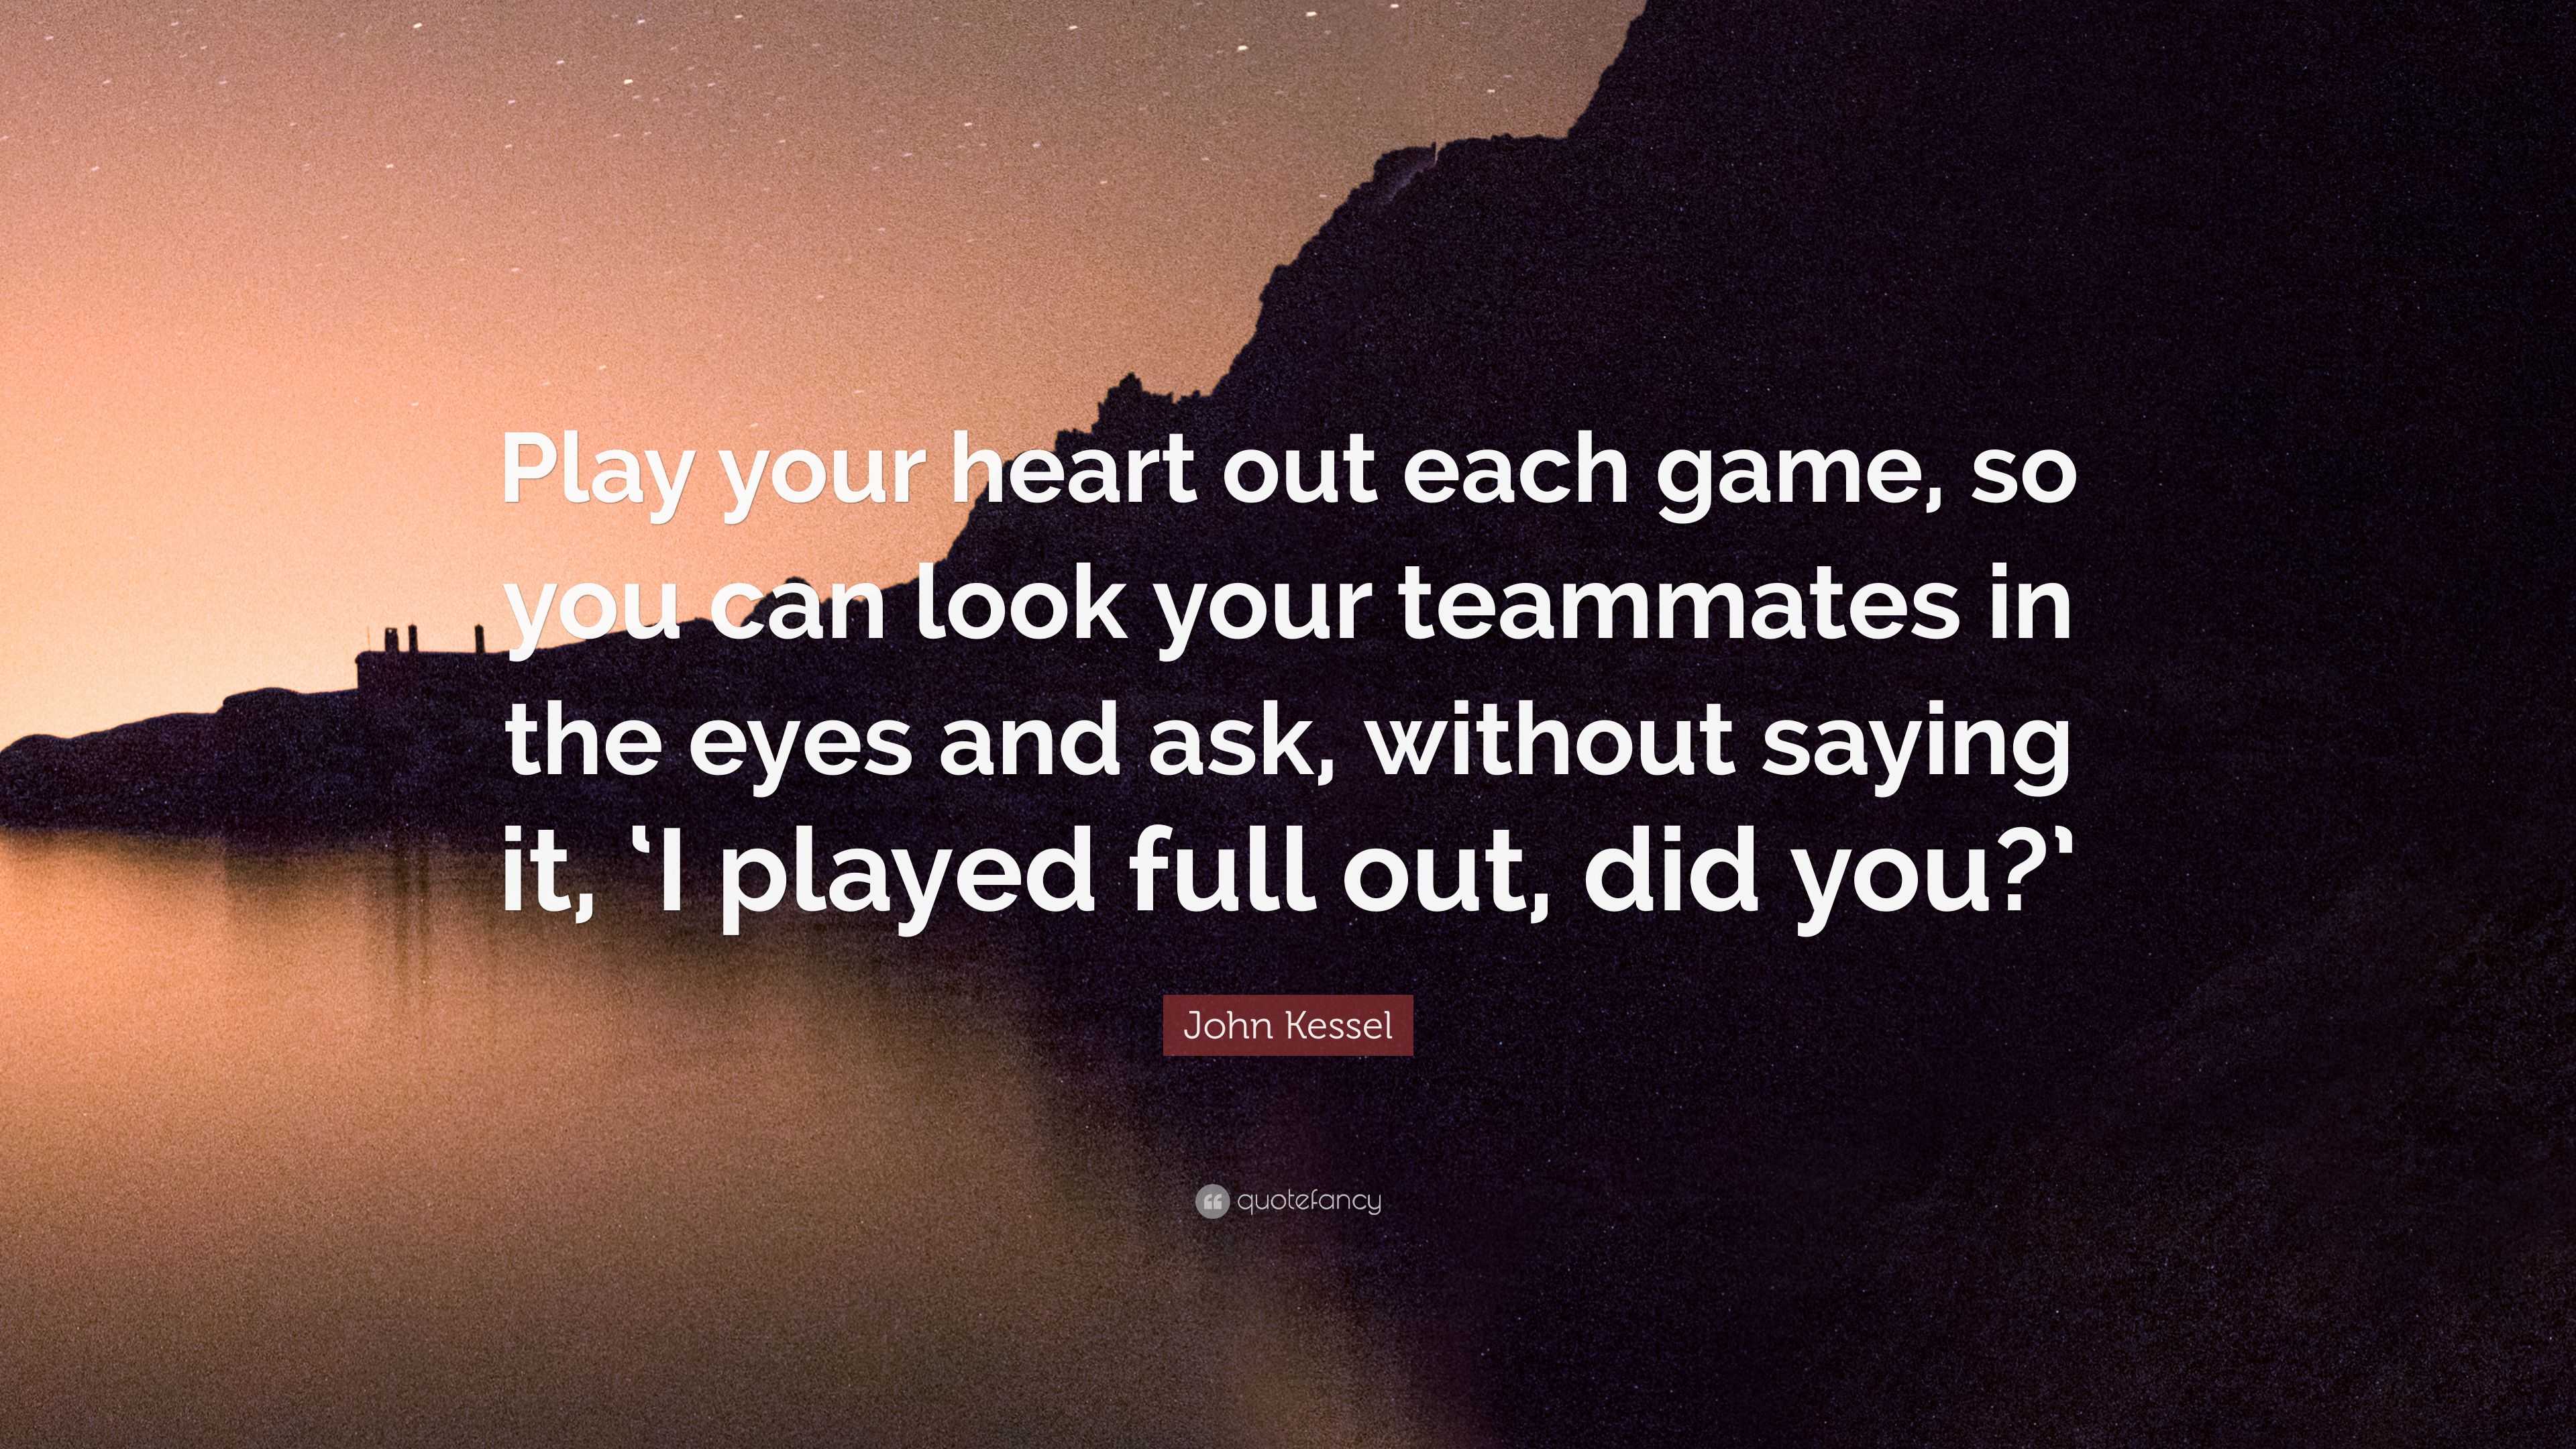 John Kessel Quote: “Play your heart out each game, so you can look your  teammates in the eyes and ask, without saying it, 'I played full out”